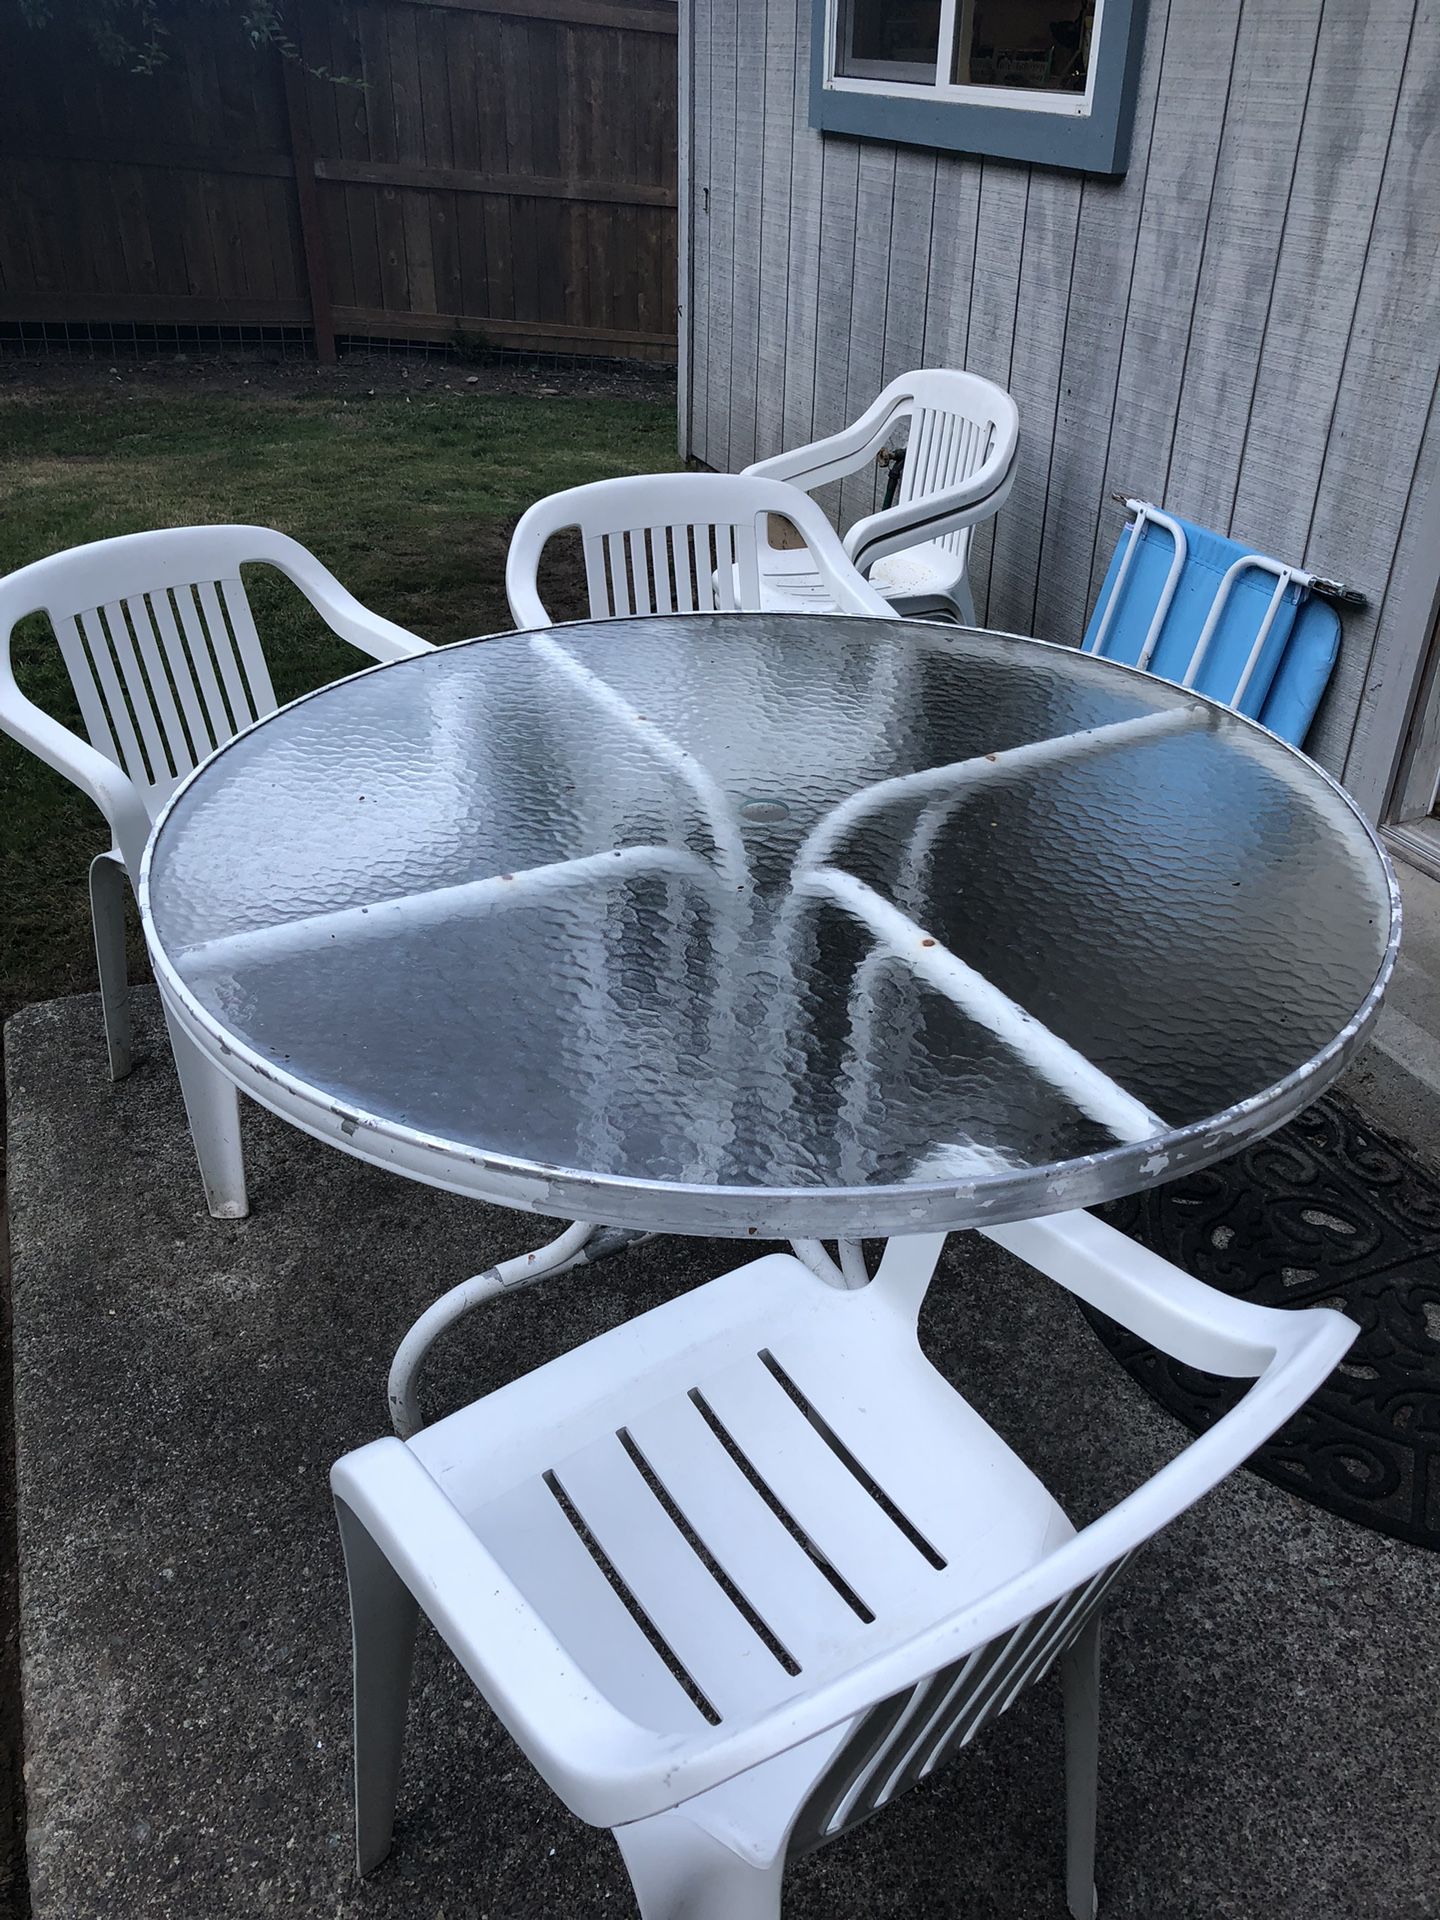 Patio Furniture- Table & 5 Chairs